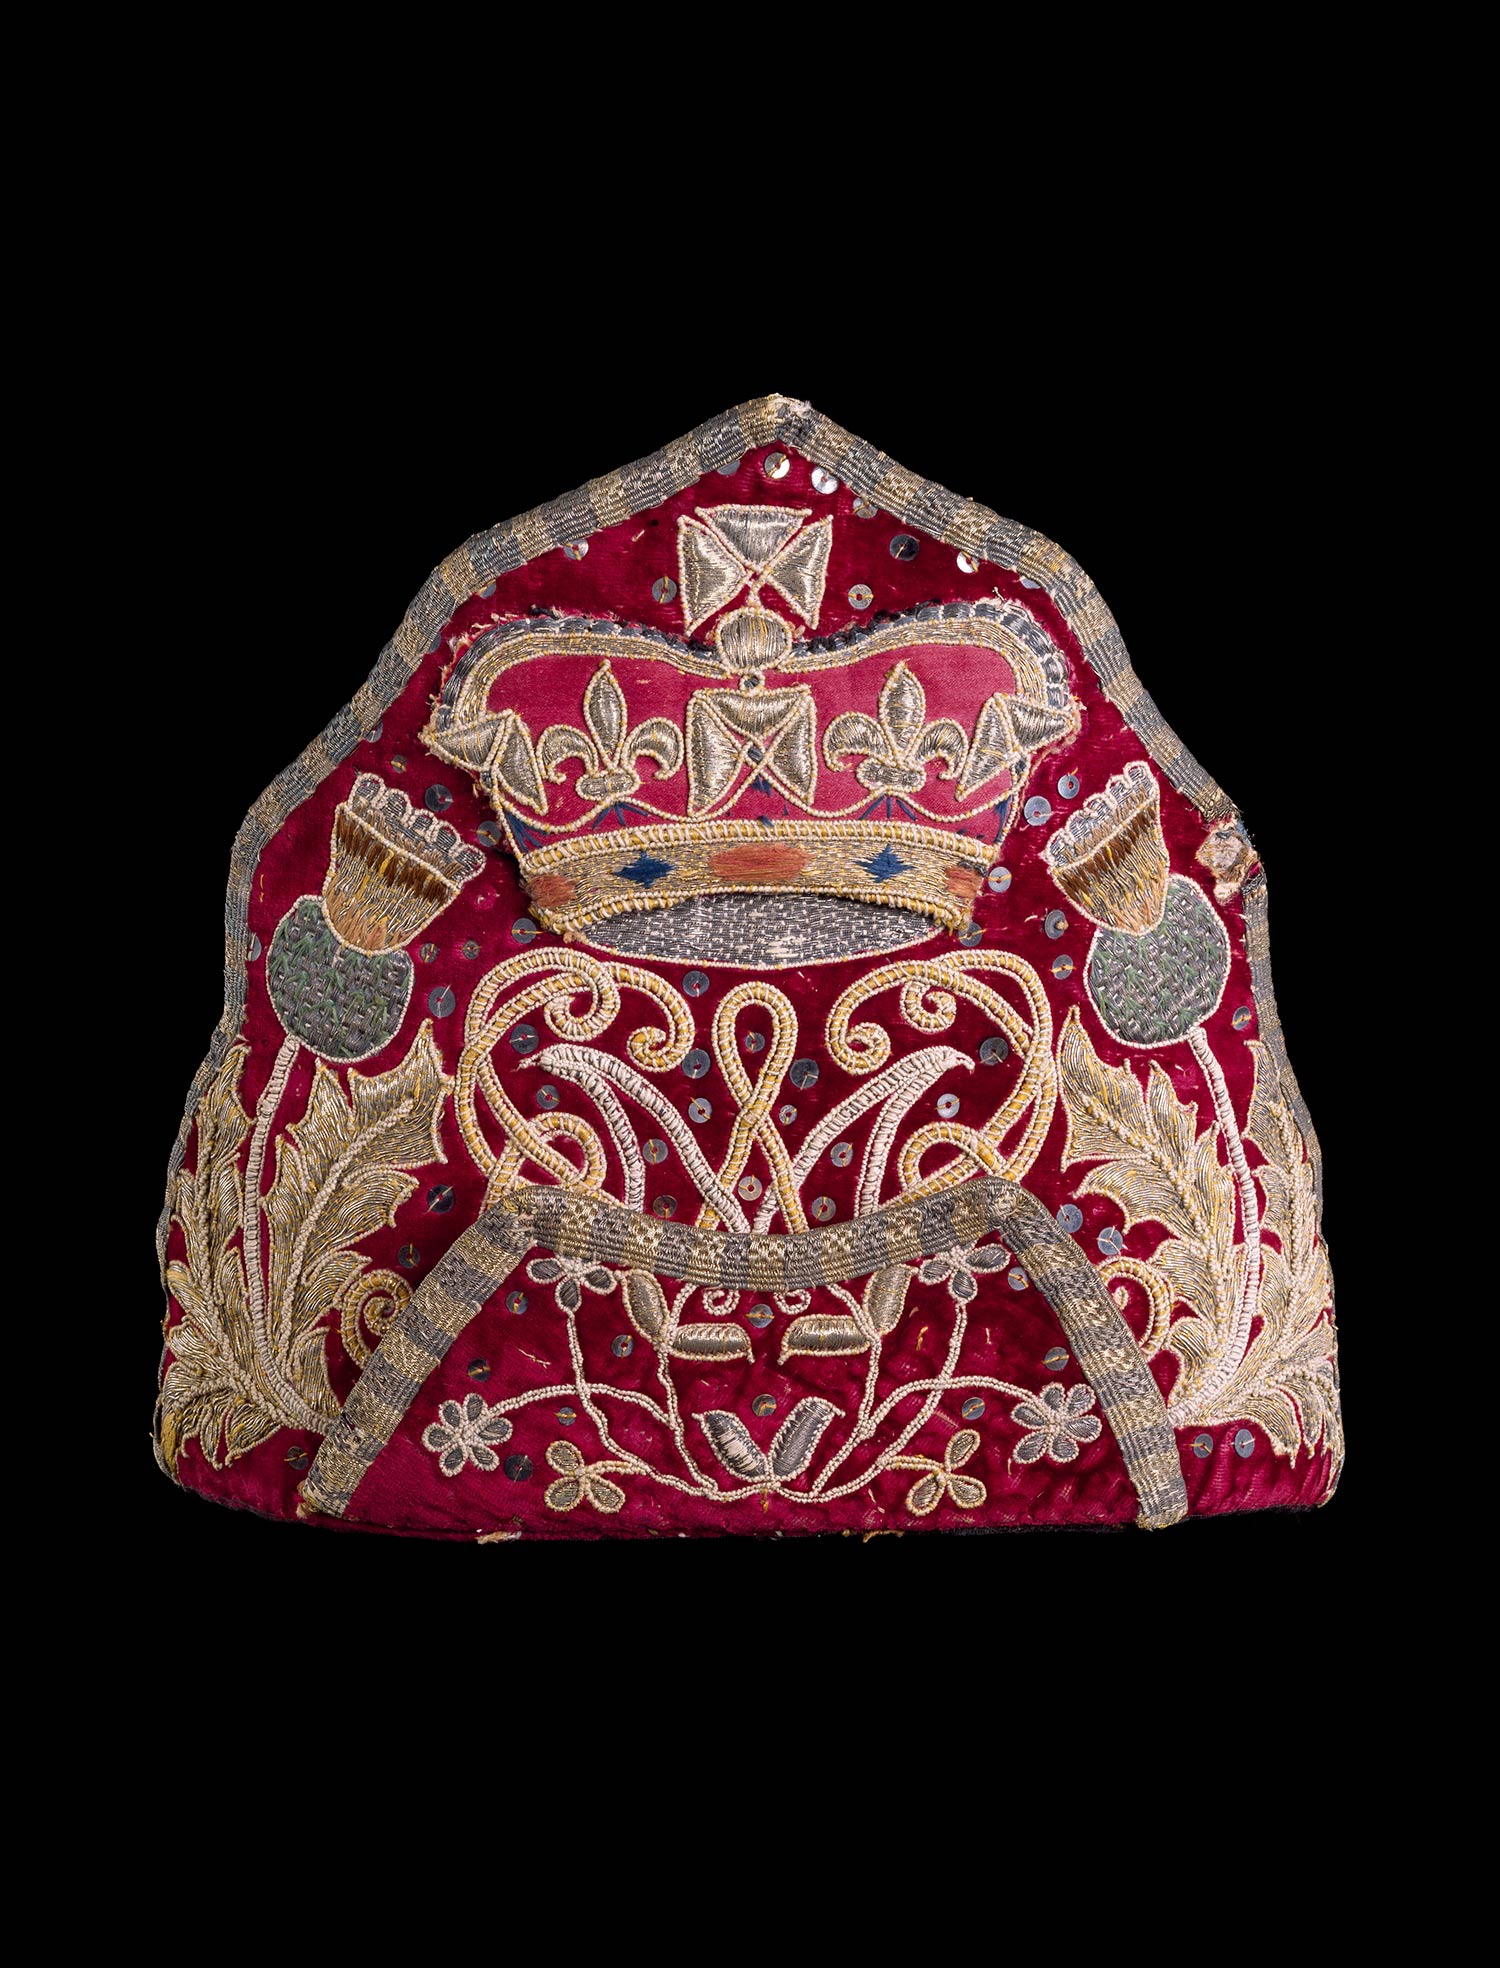 Embroidered mitre cap bearing the cypher of William and Mary flanked by thistles c.1690.